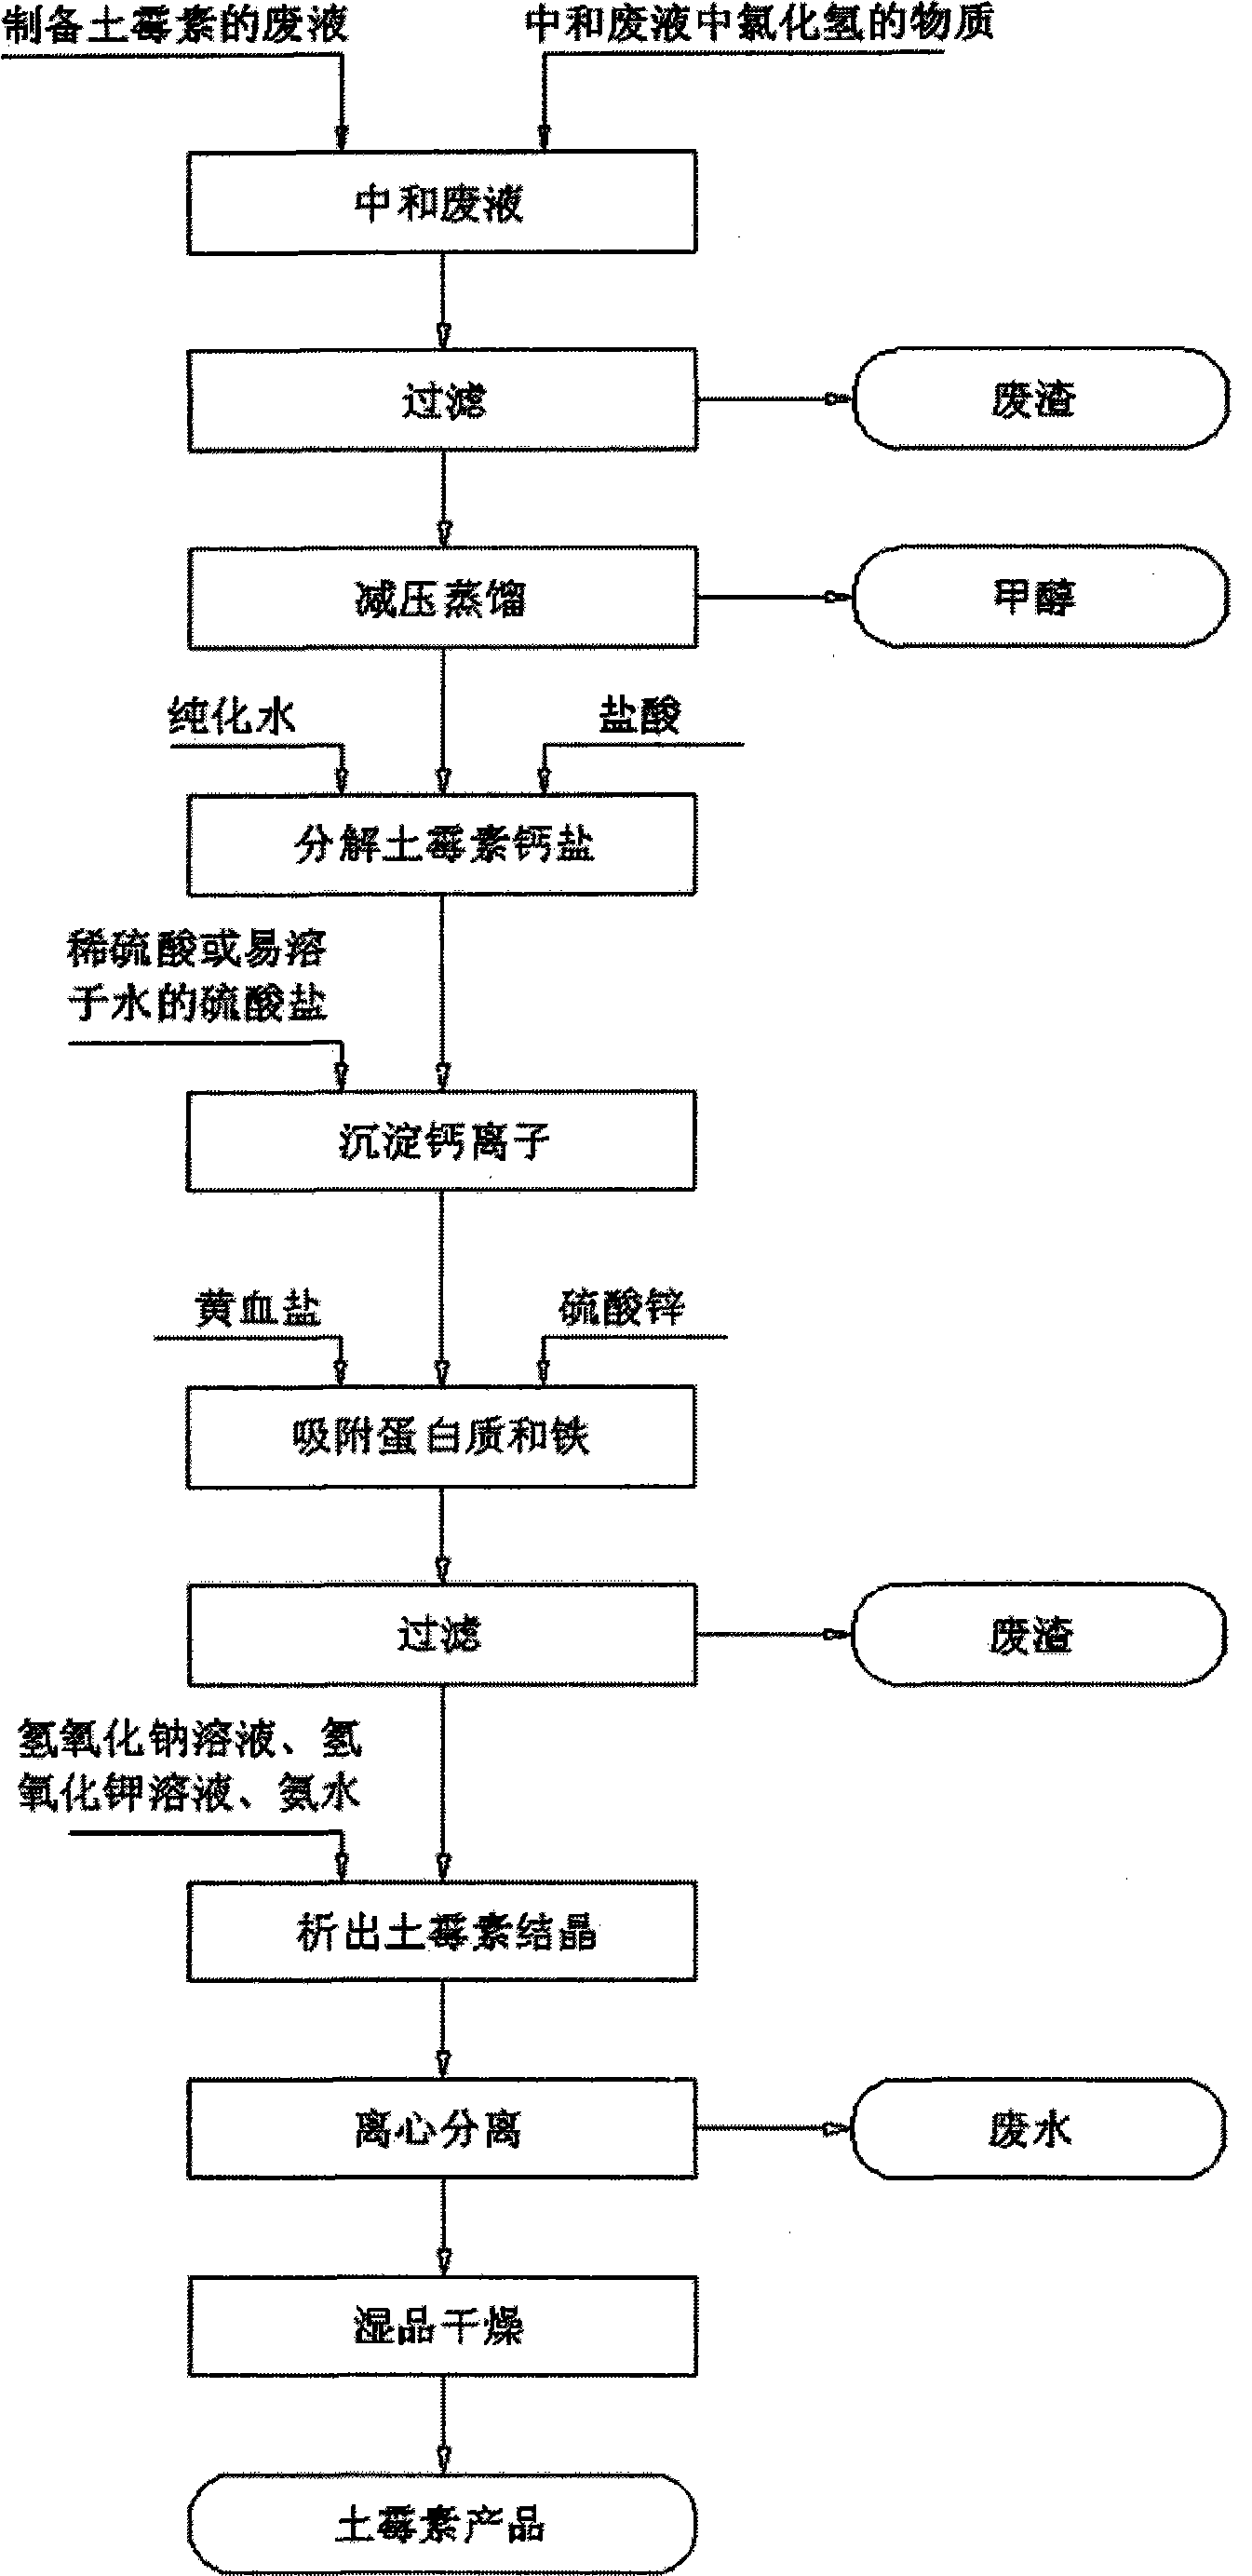 Method for recovering oxytetracycline from oxytetracycline hydrochloride waste liquid